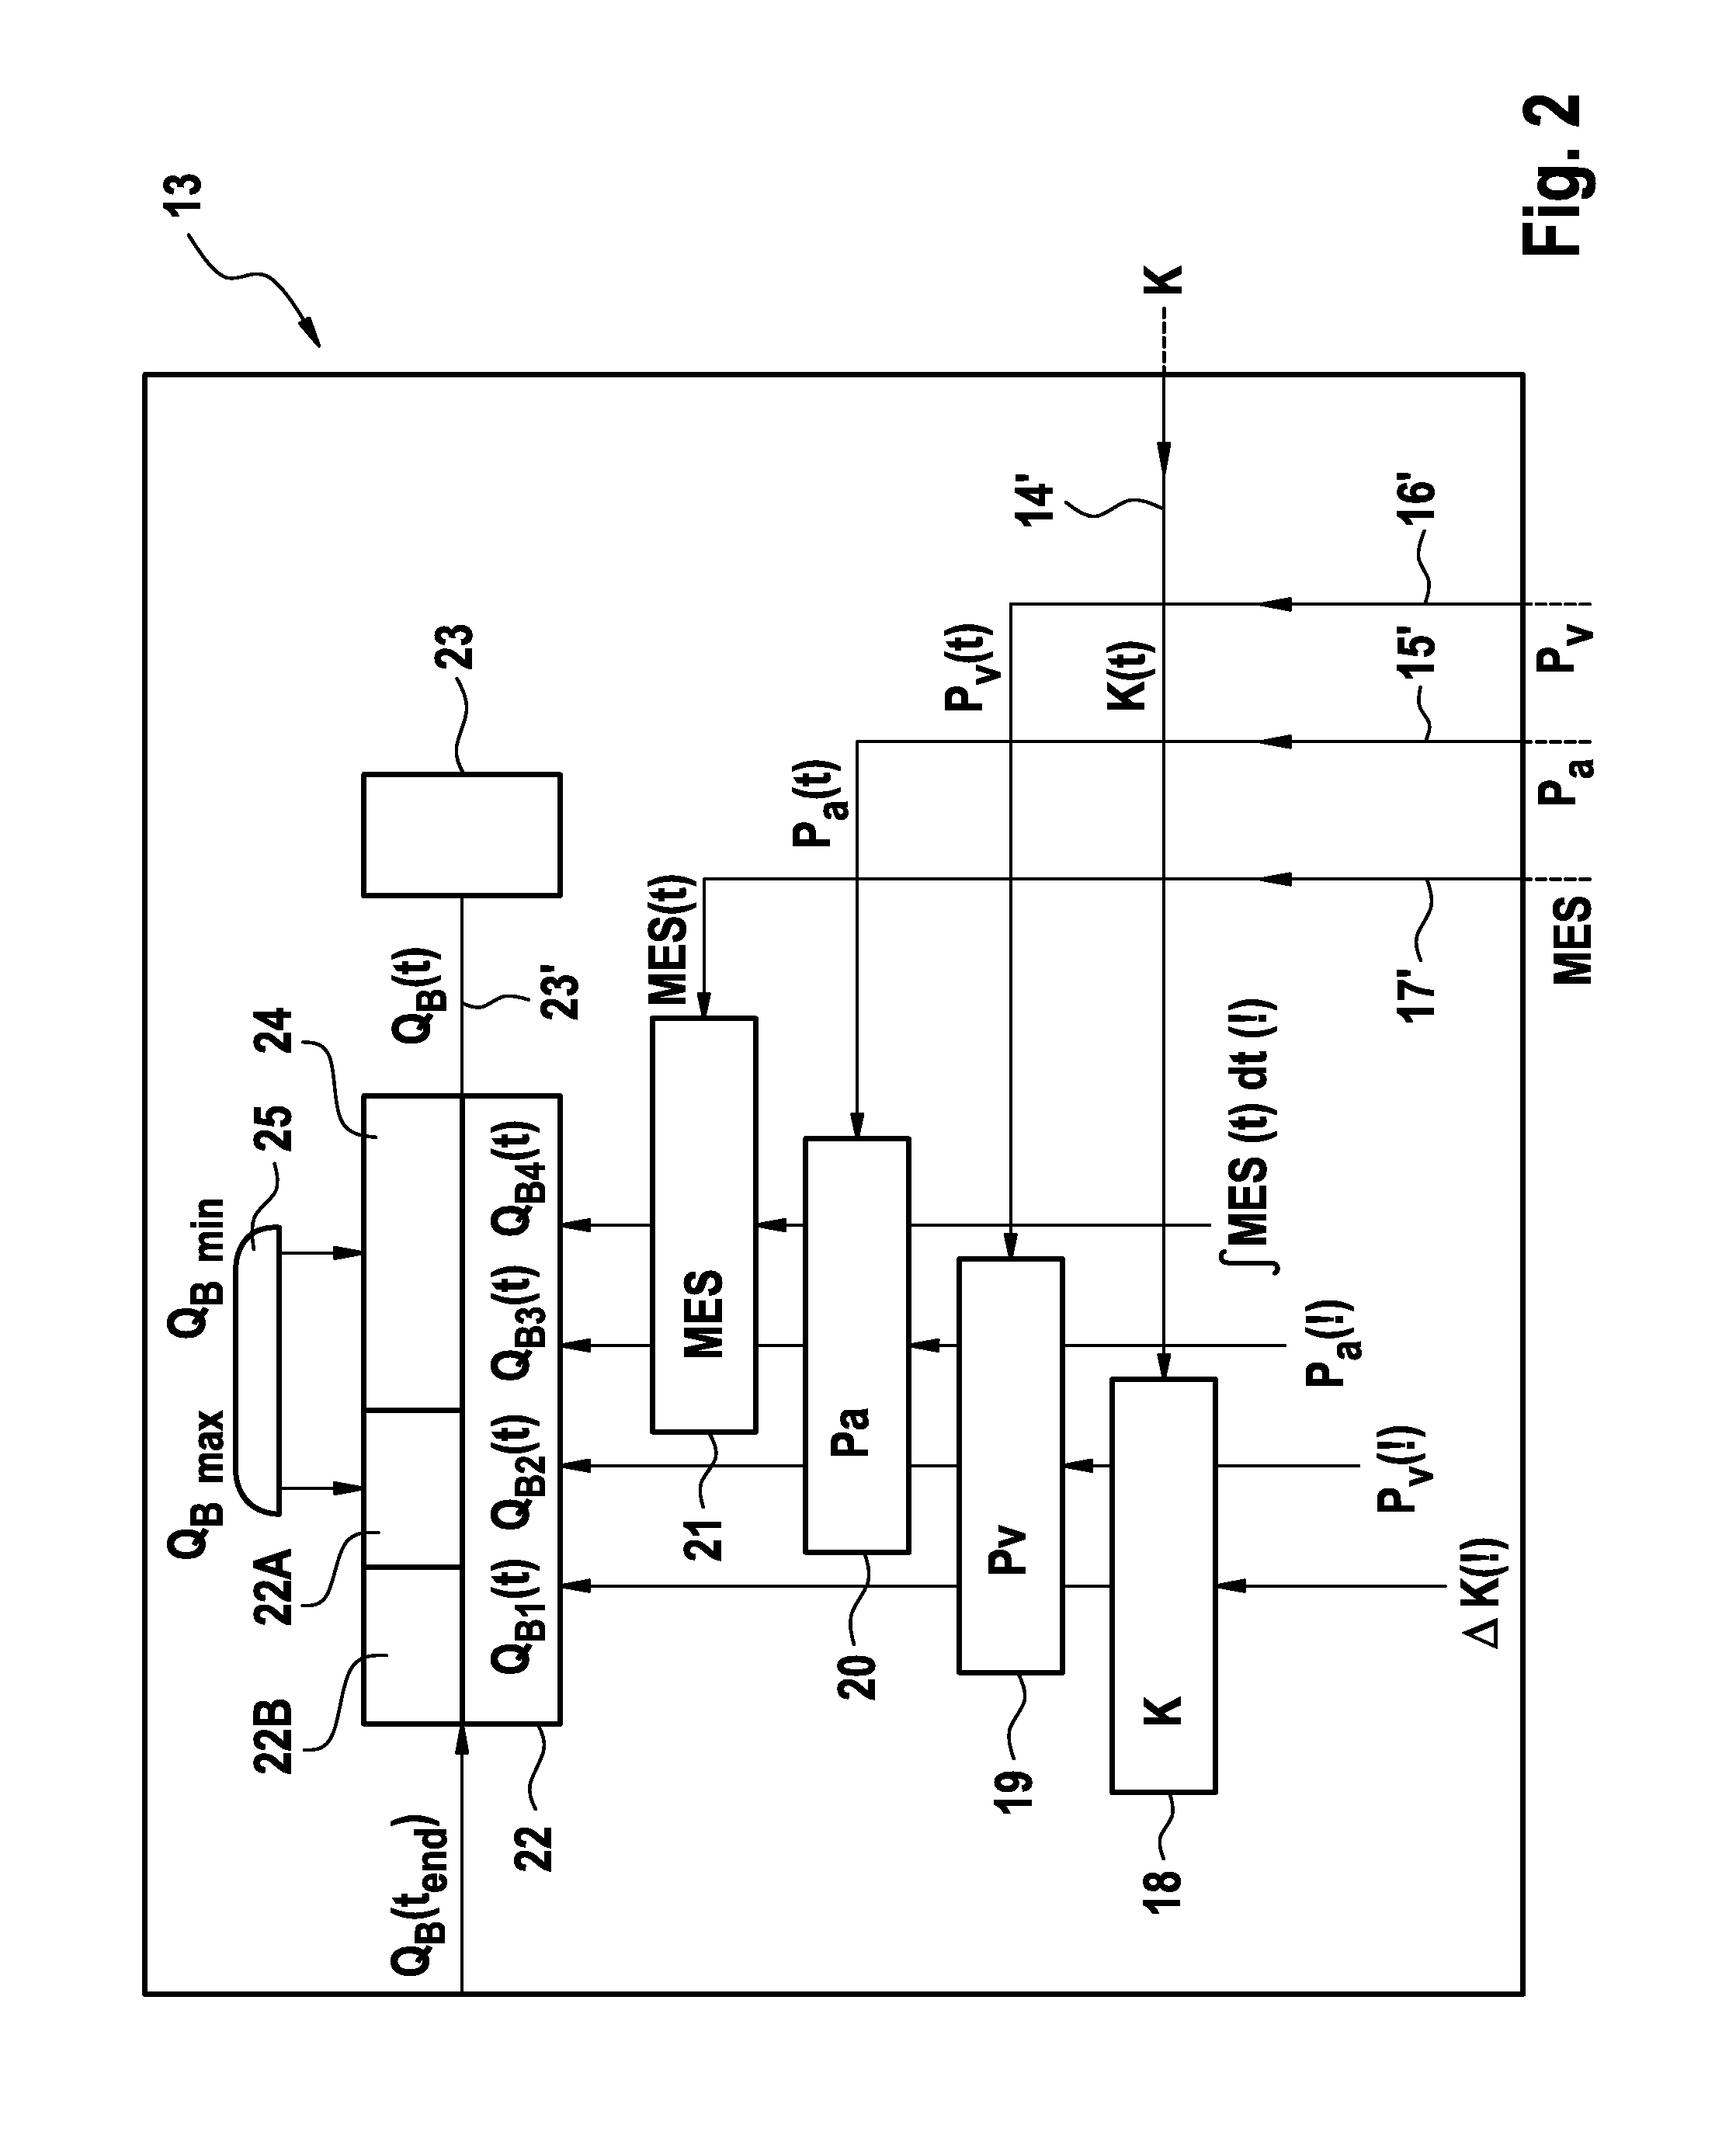 Apparatus for extra-corporeal blood treatment and method of determining a blood flow rate for an extra-corporeal blood treatment apparatus